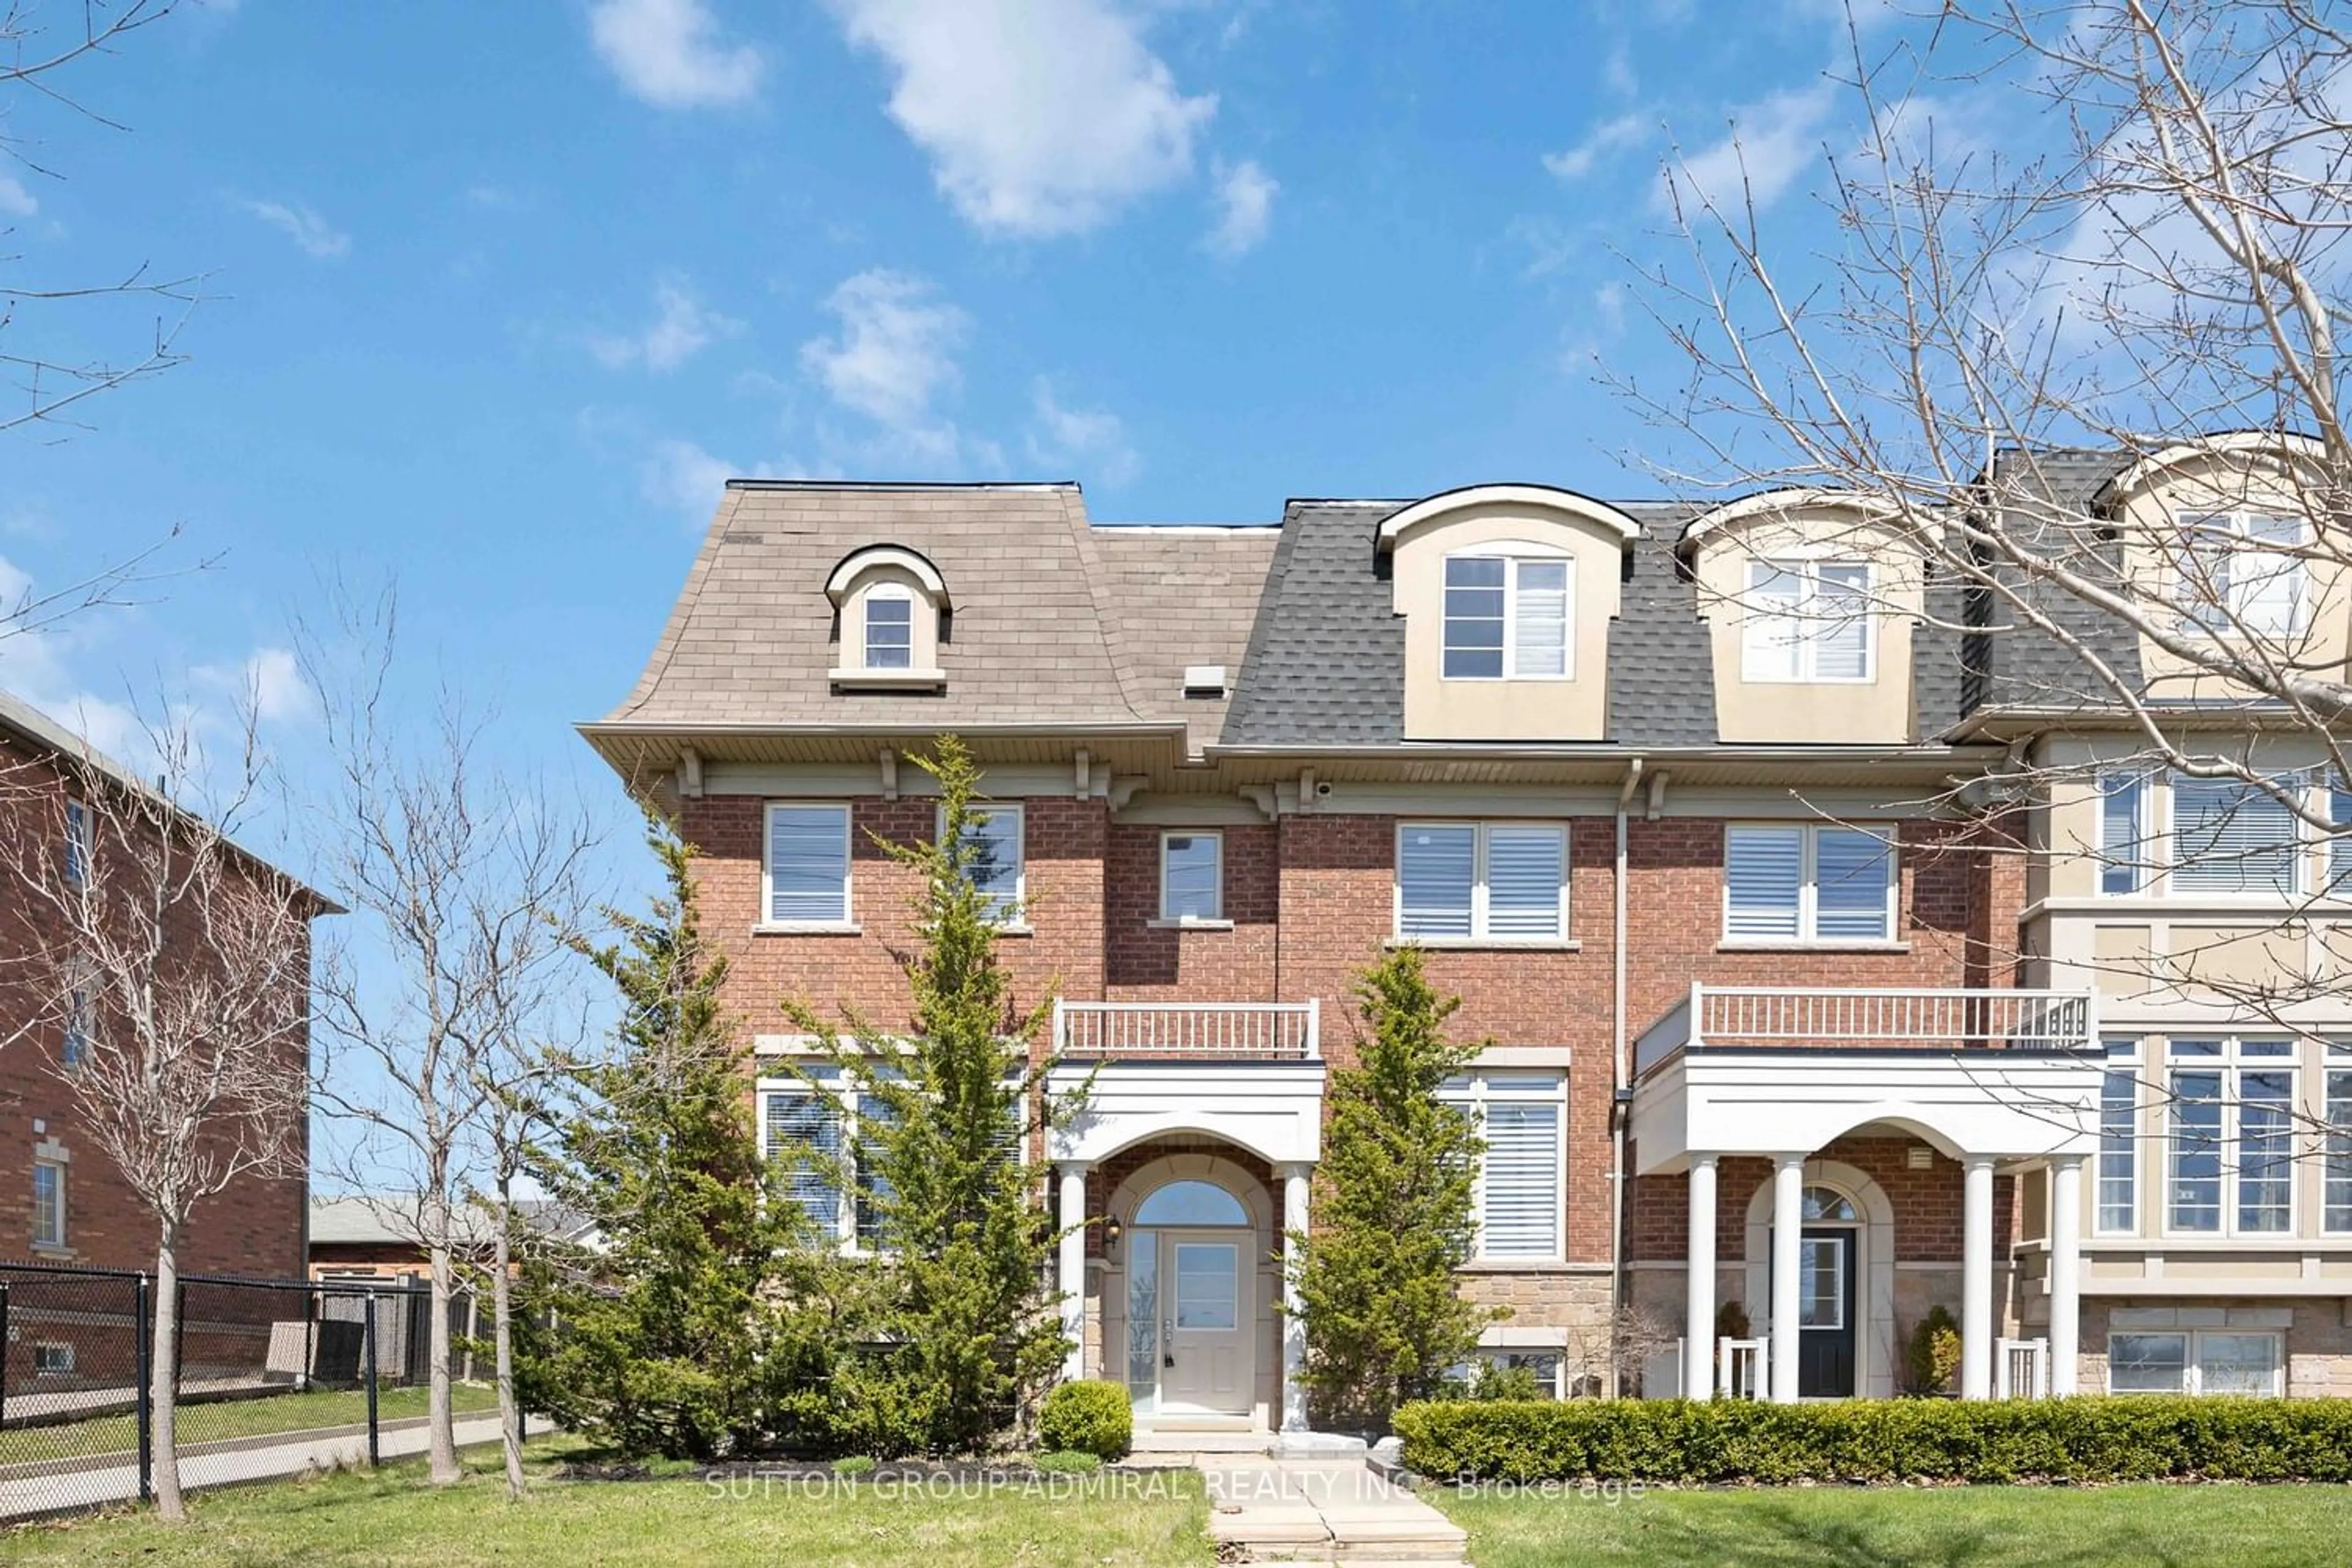 Home with brick exterior material for 63 Zokol Dr, Aurora Ontario L4G 0B7